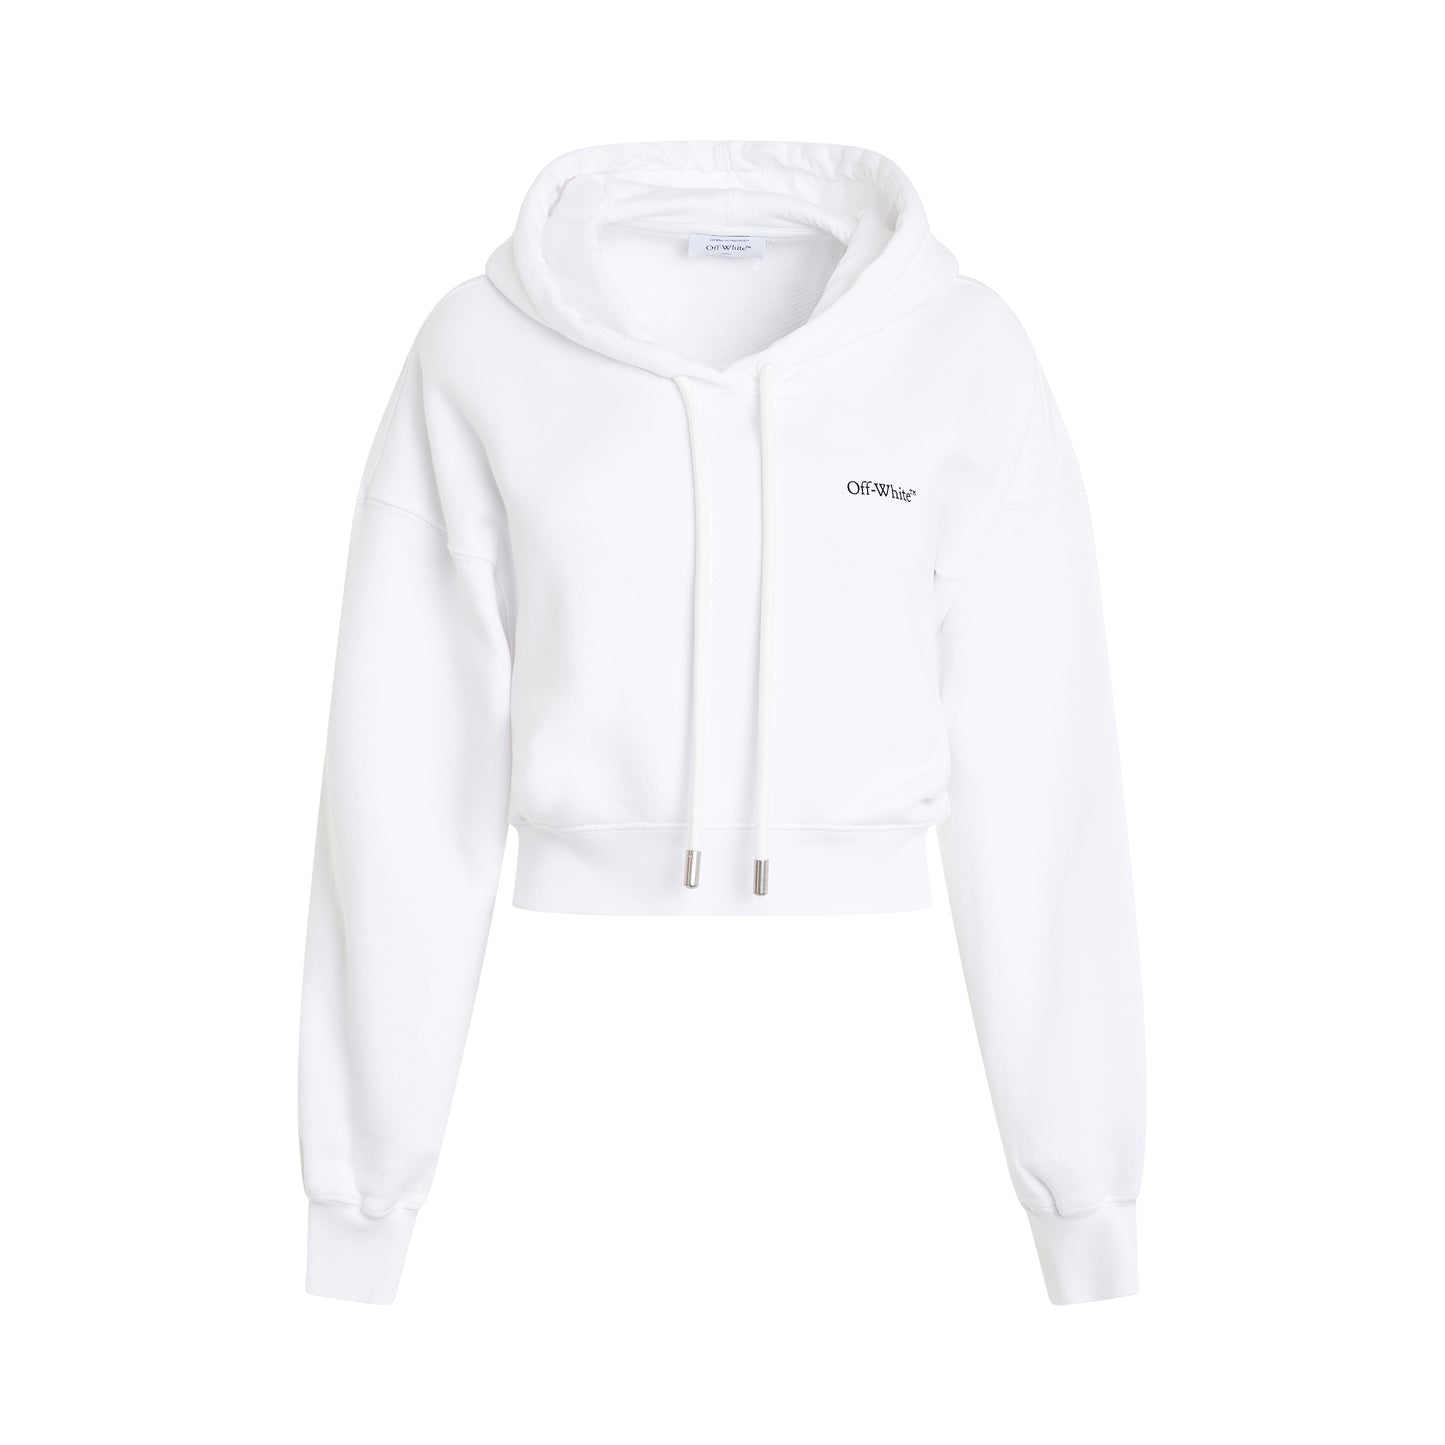 X-Ray Arrow Crop Hoodie in White/Multicolour